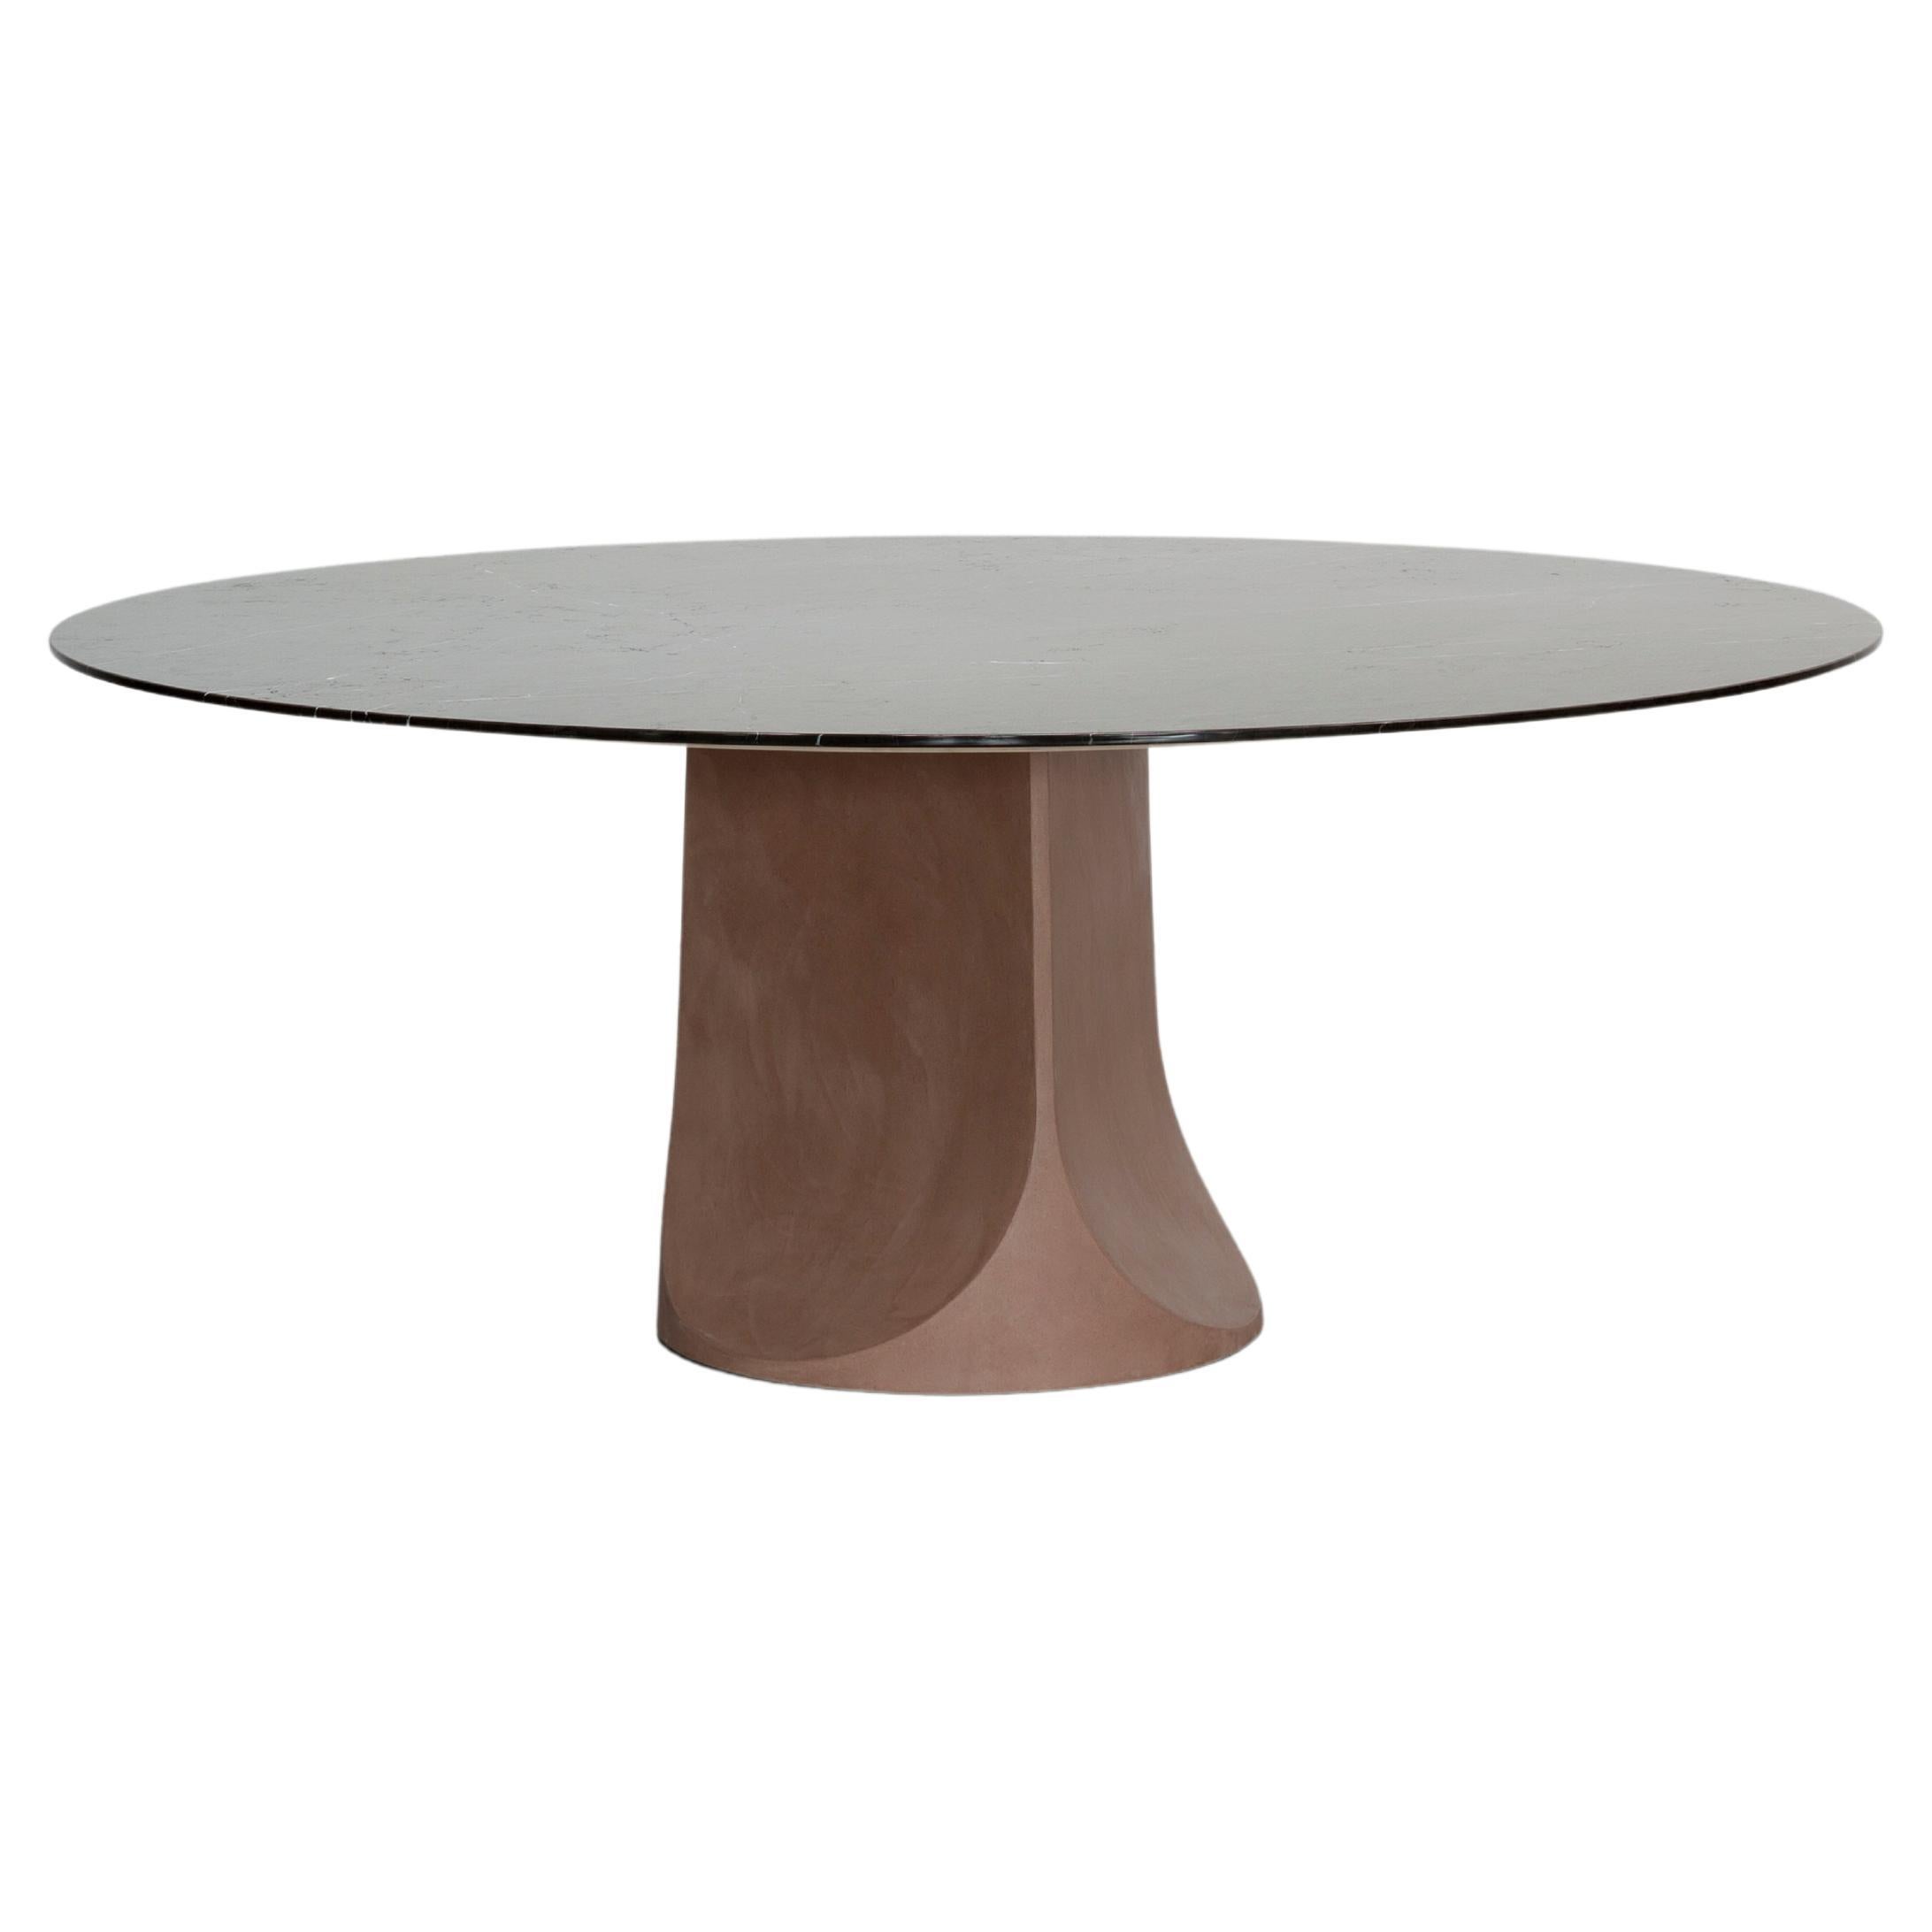 Tacchini Togrul Marble Table Designed by Gordon Guillaumier  in STOCK